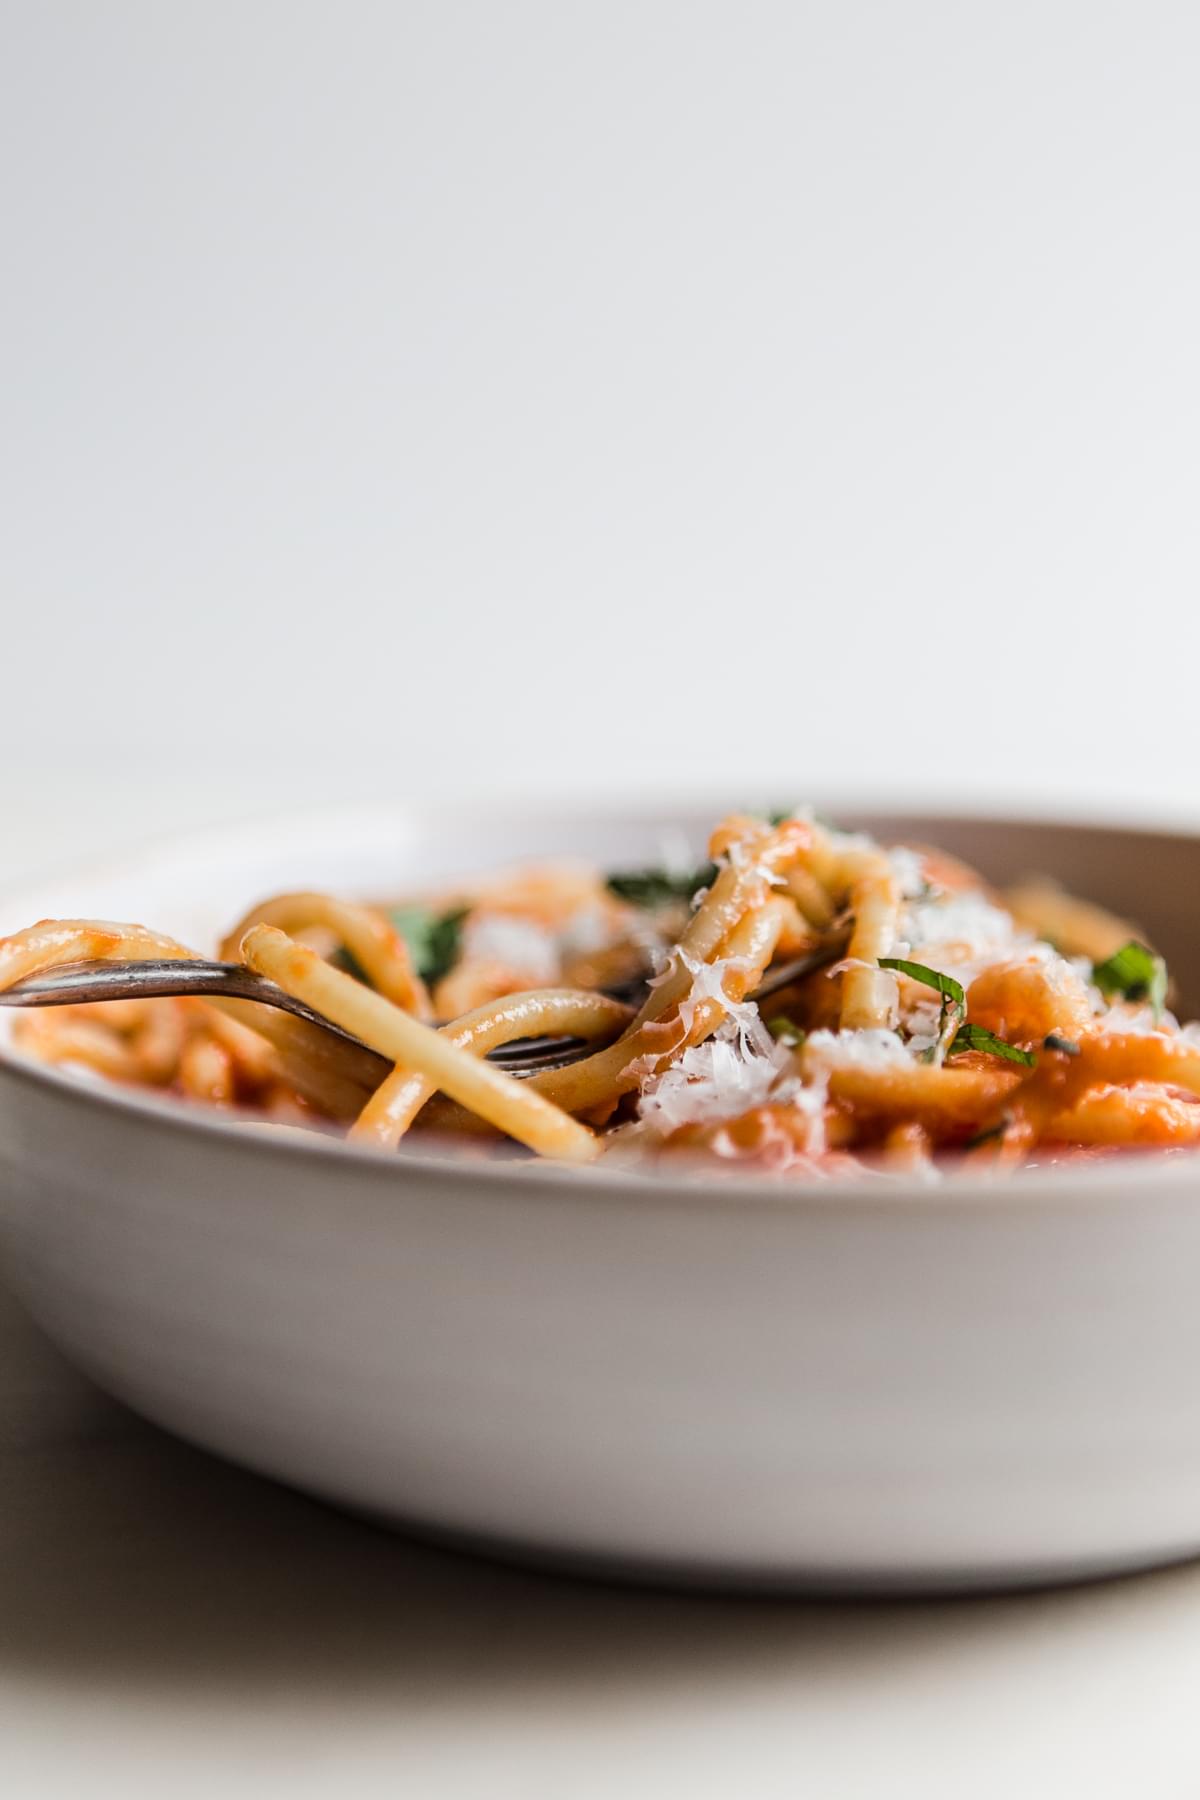 Three Ingredient Tomato Sauce pomodoro sauce with noodles in a bowl with fresh basil and parmesan cheese